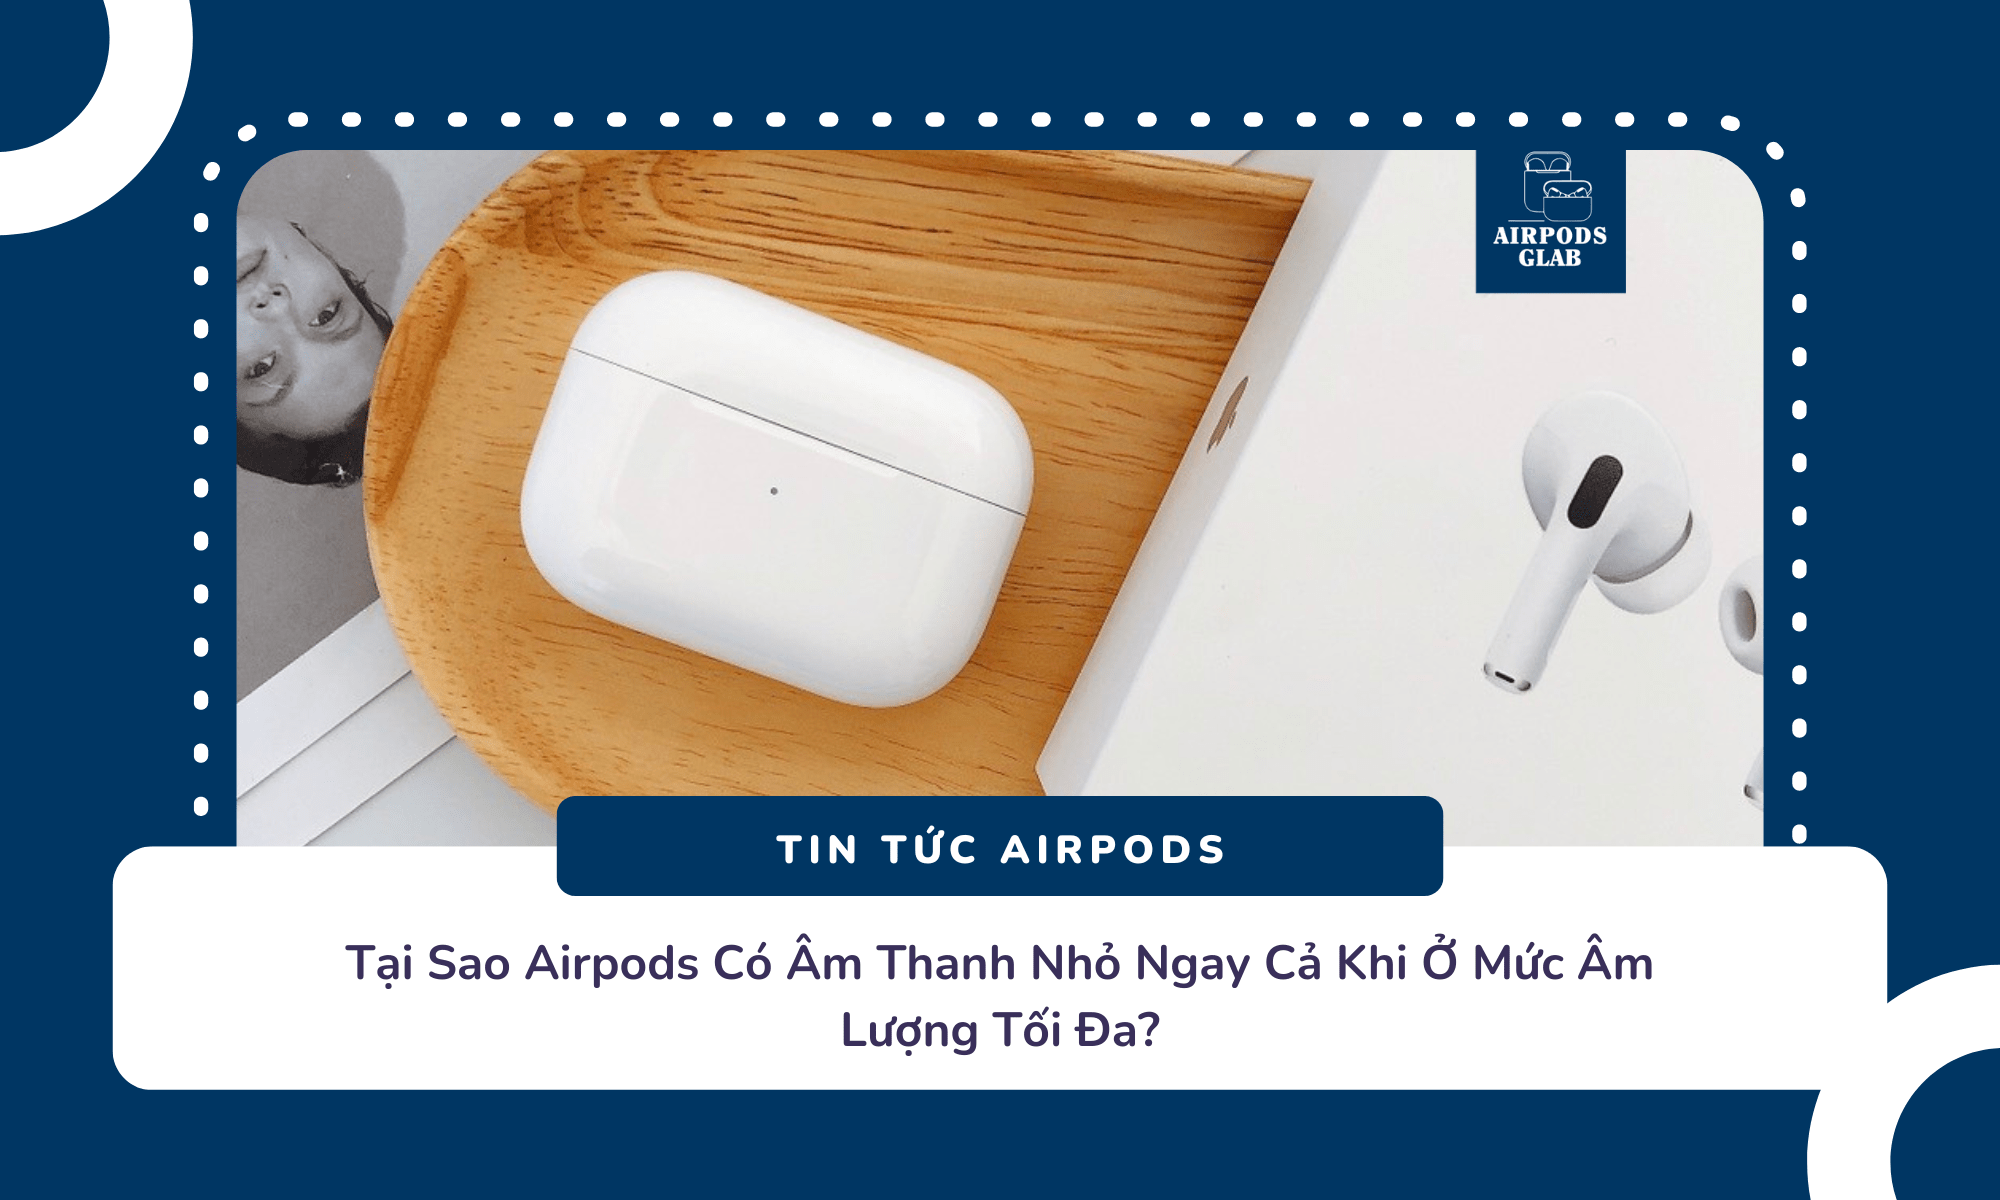 cach-tang-am-luong-airpods 